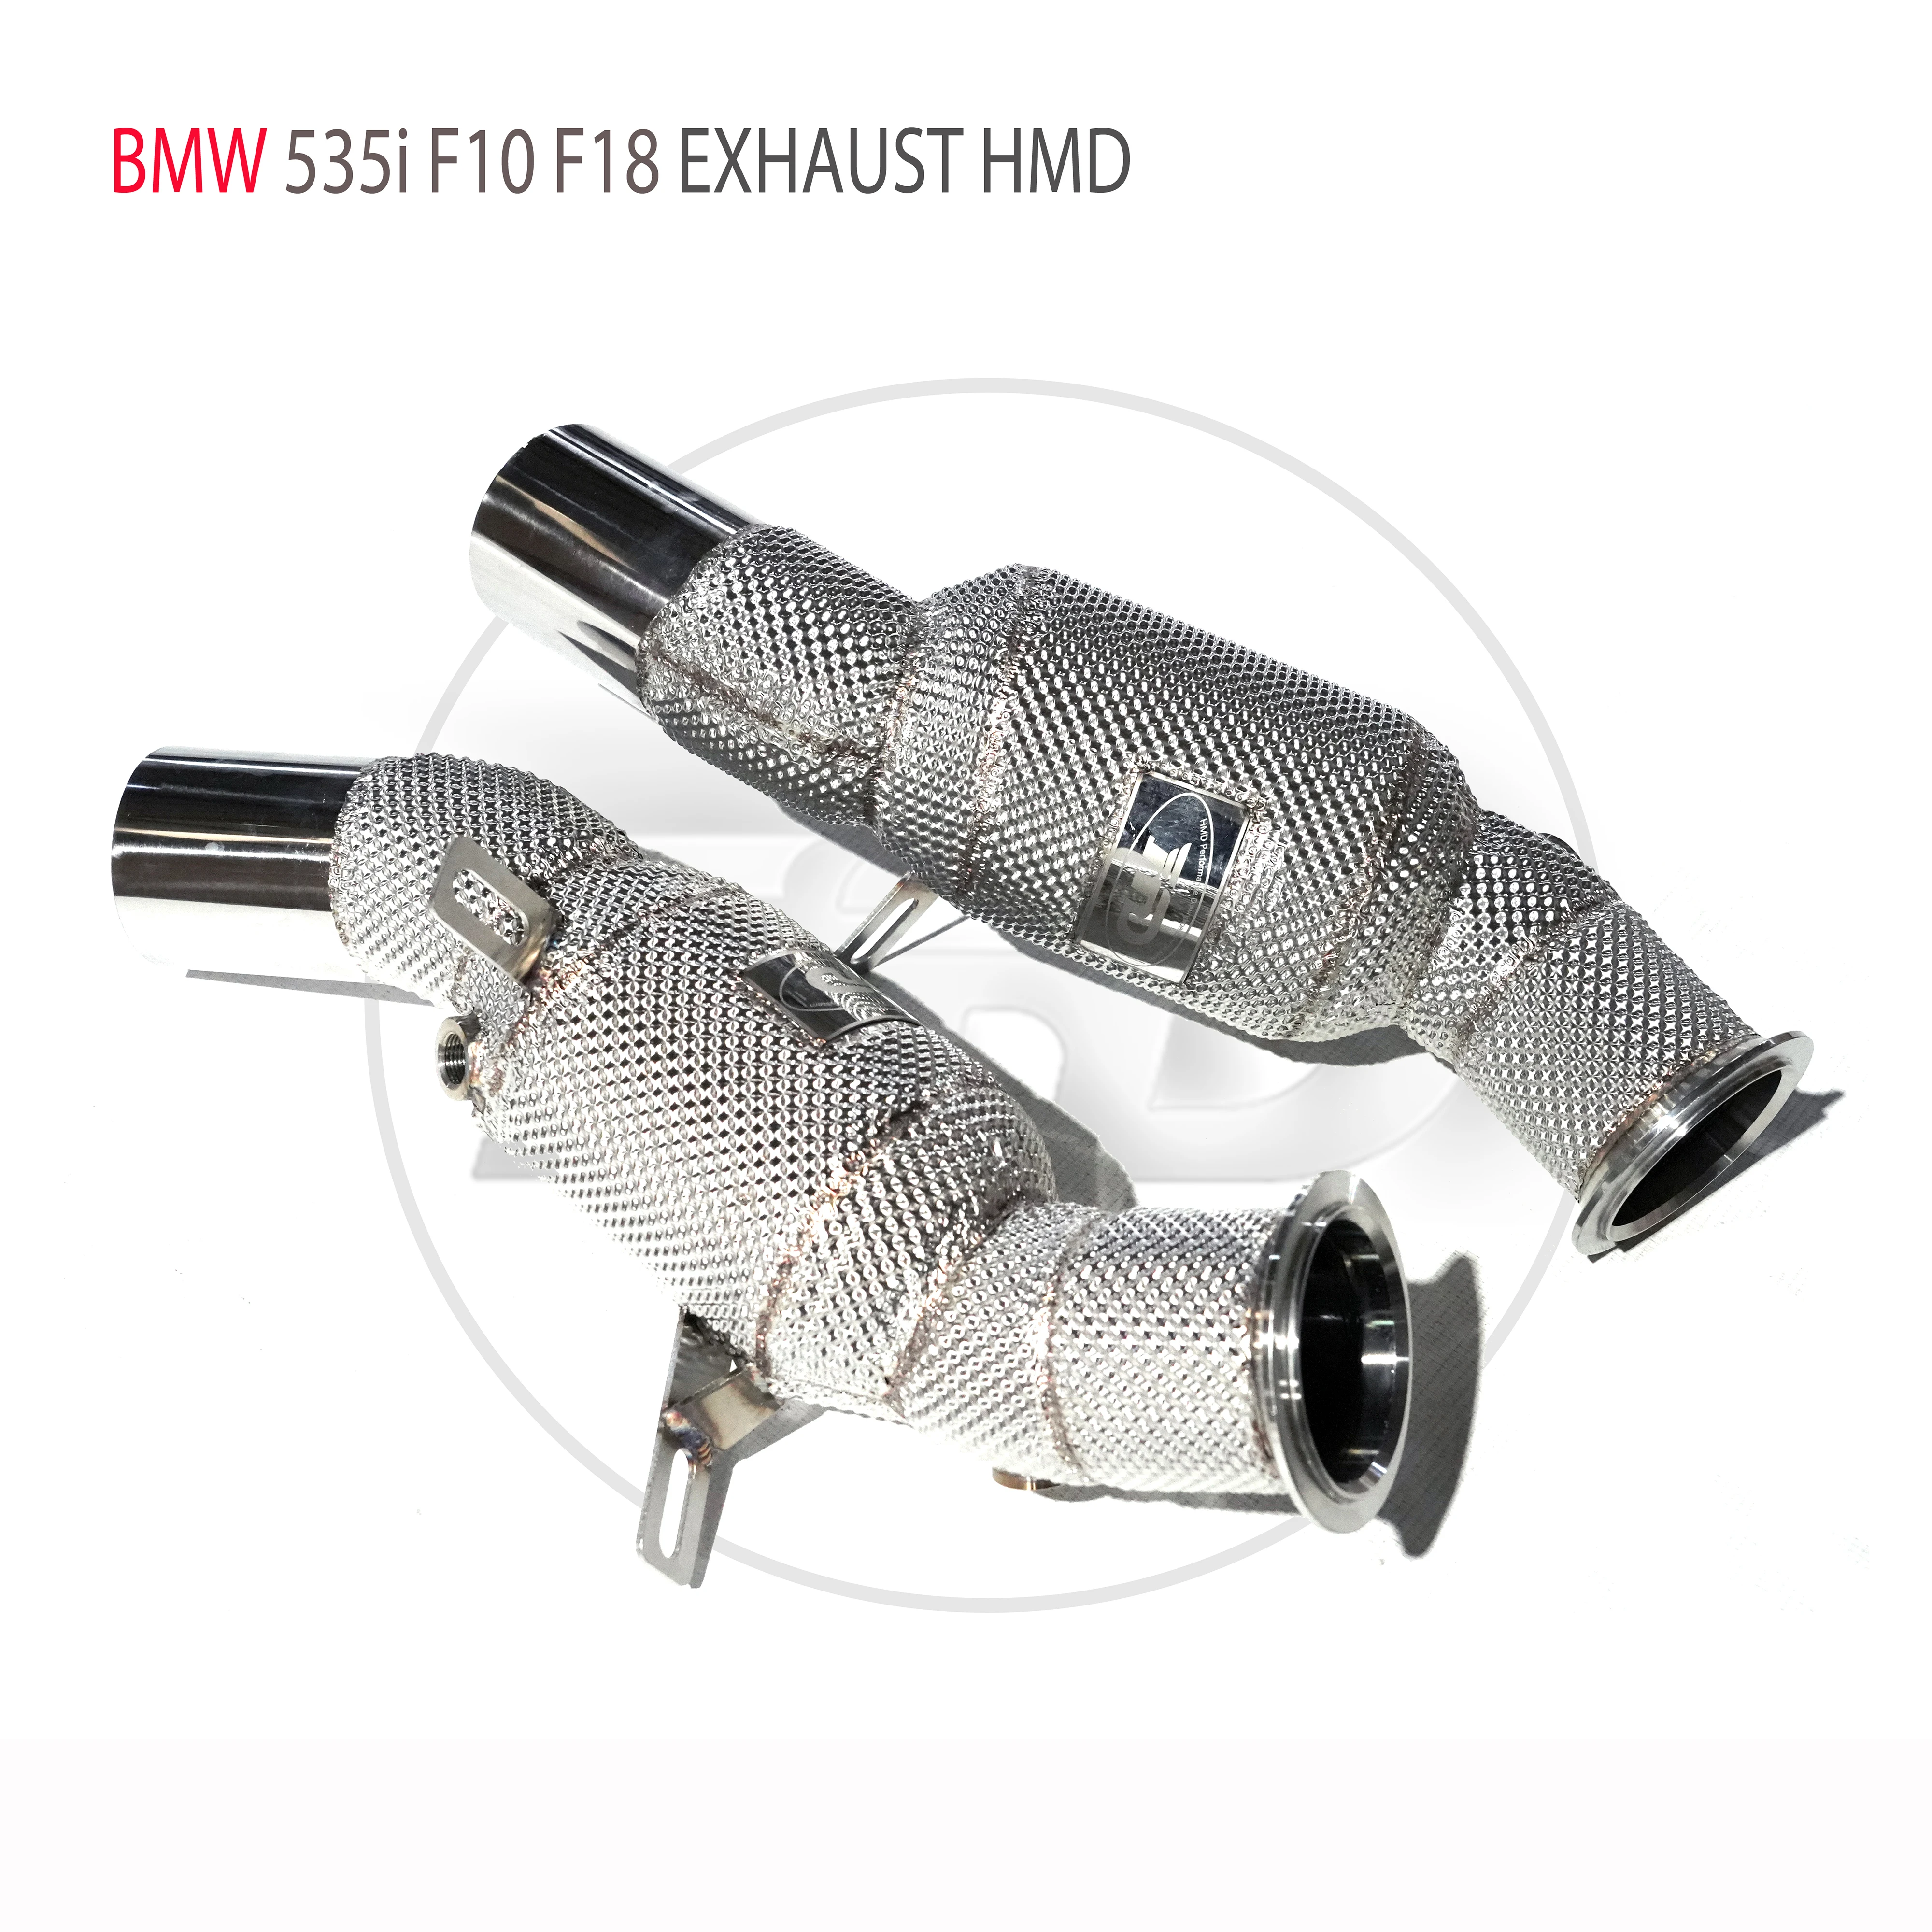 

HMD Exhaust Manifold Downpipe for BMW 535i F10 F18 Car Accessories With Catalytic Converter Header Without Cat Pipe